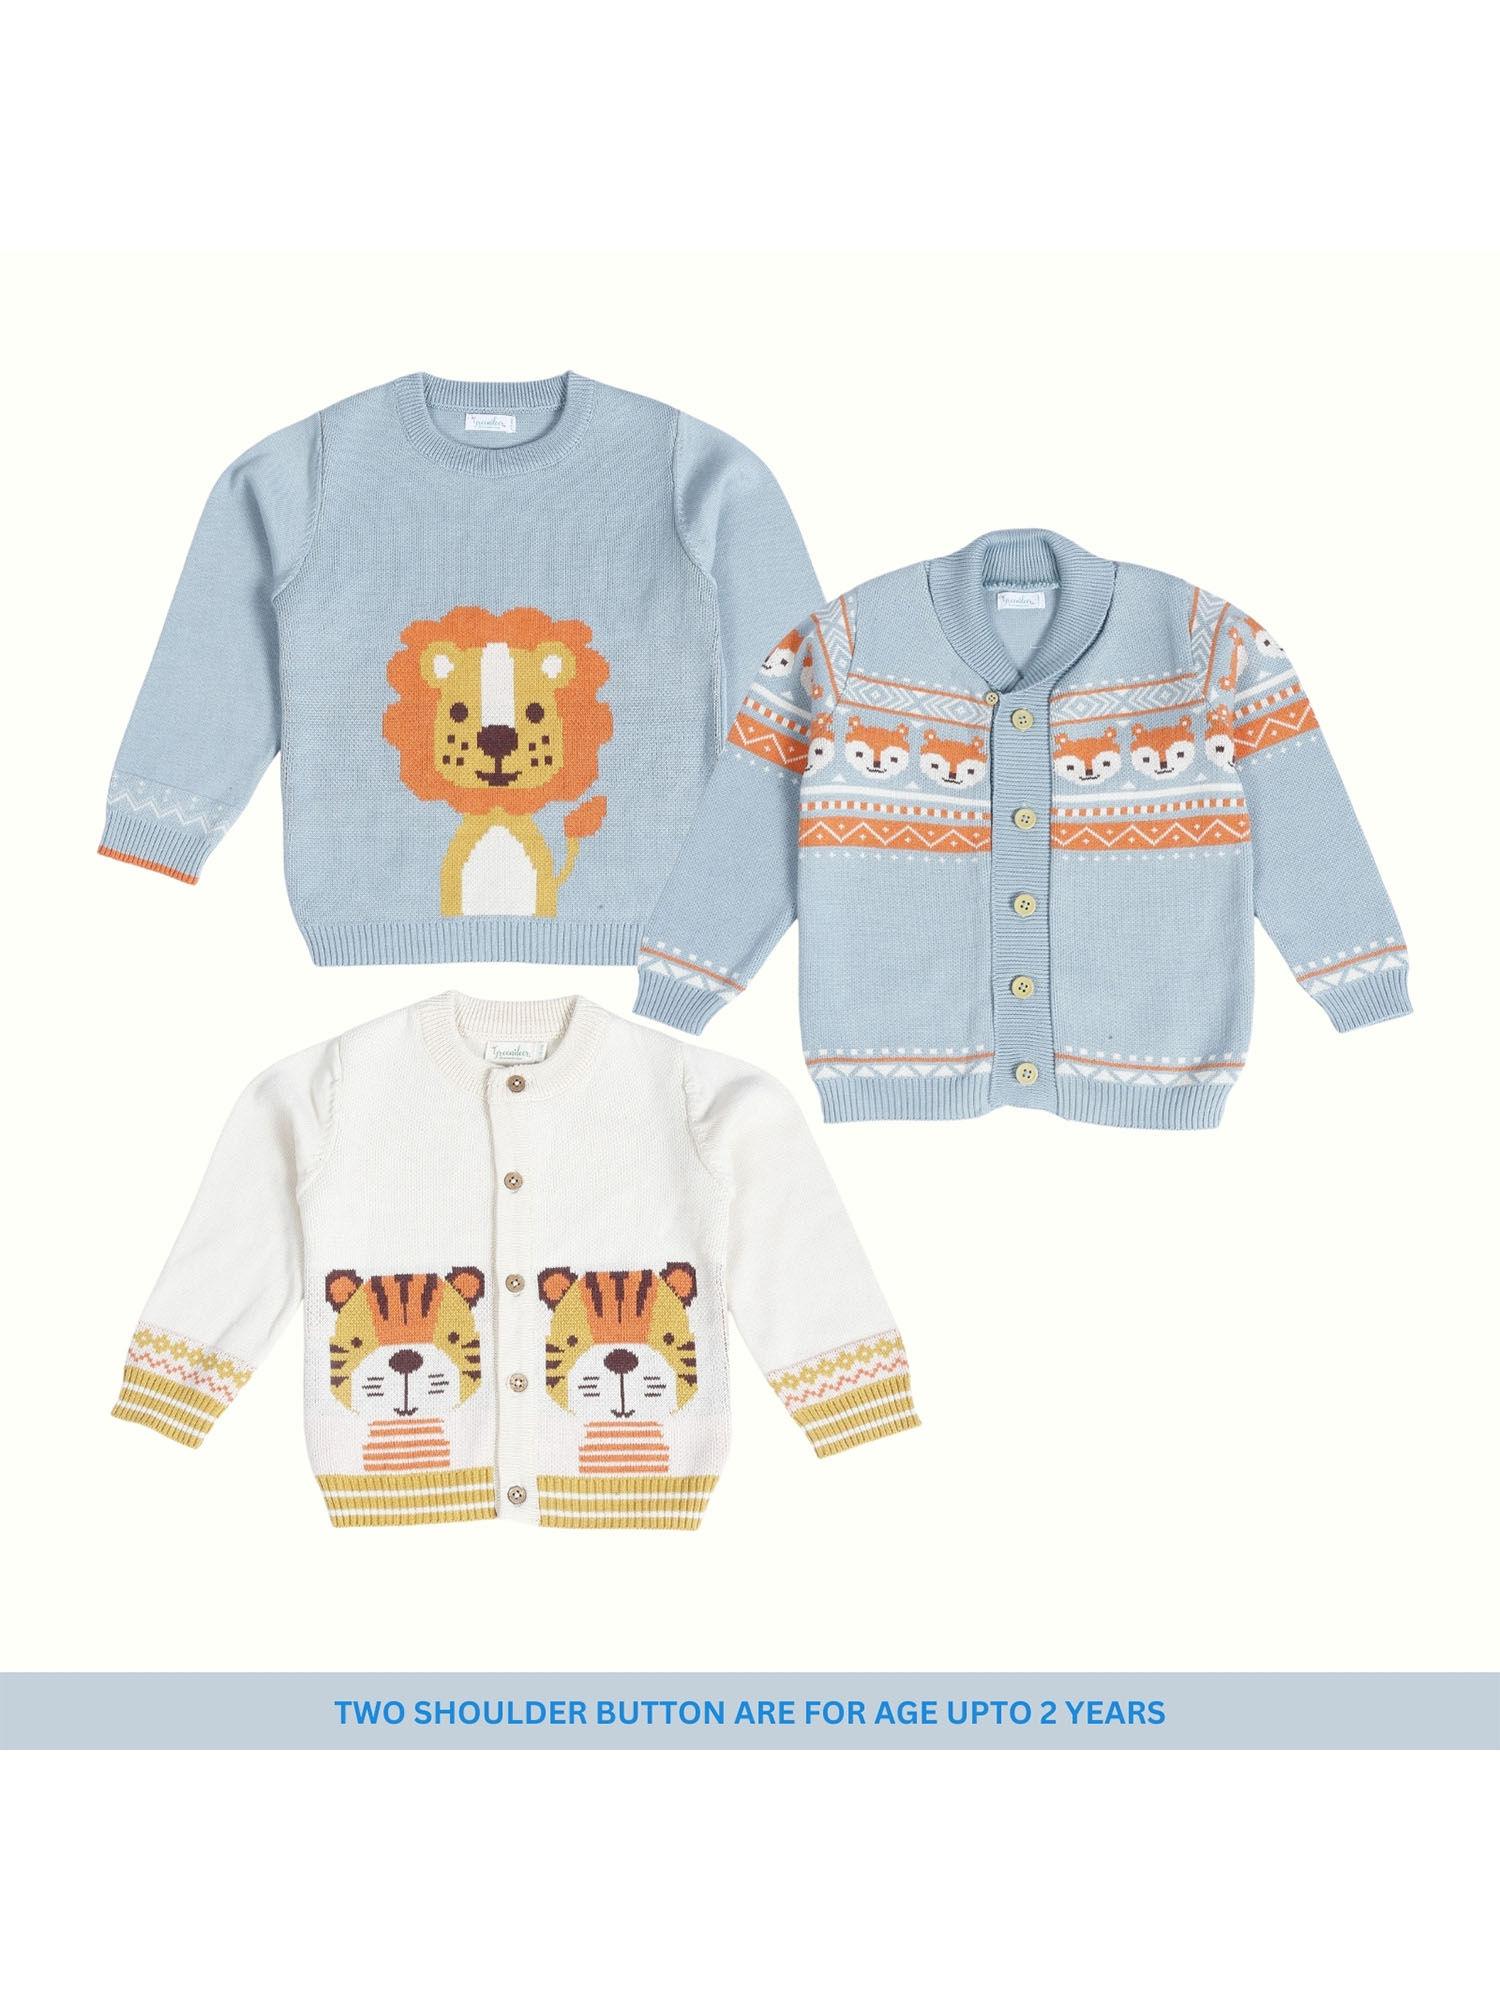 delighted lionsunny fox adorable tiger 3 sweaters (set of 3)